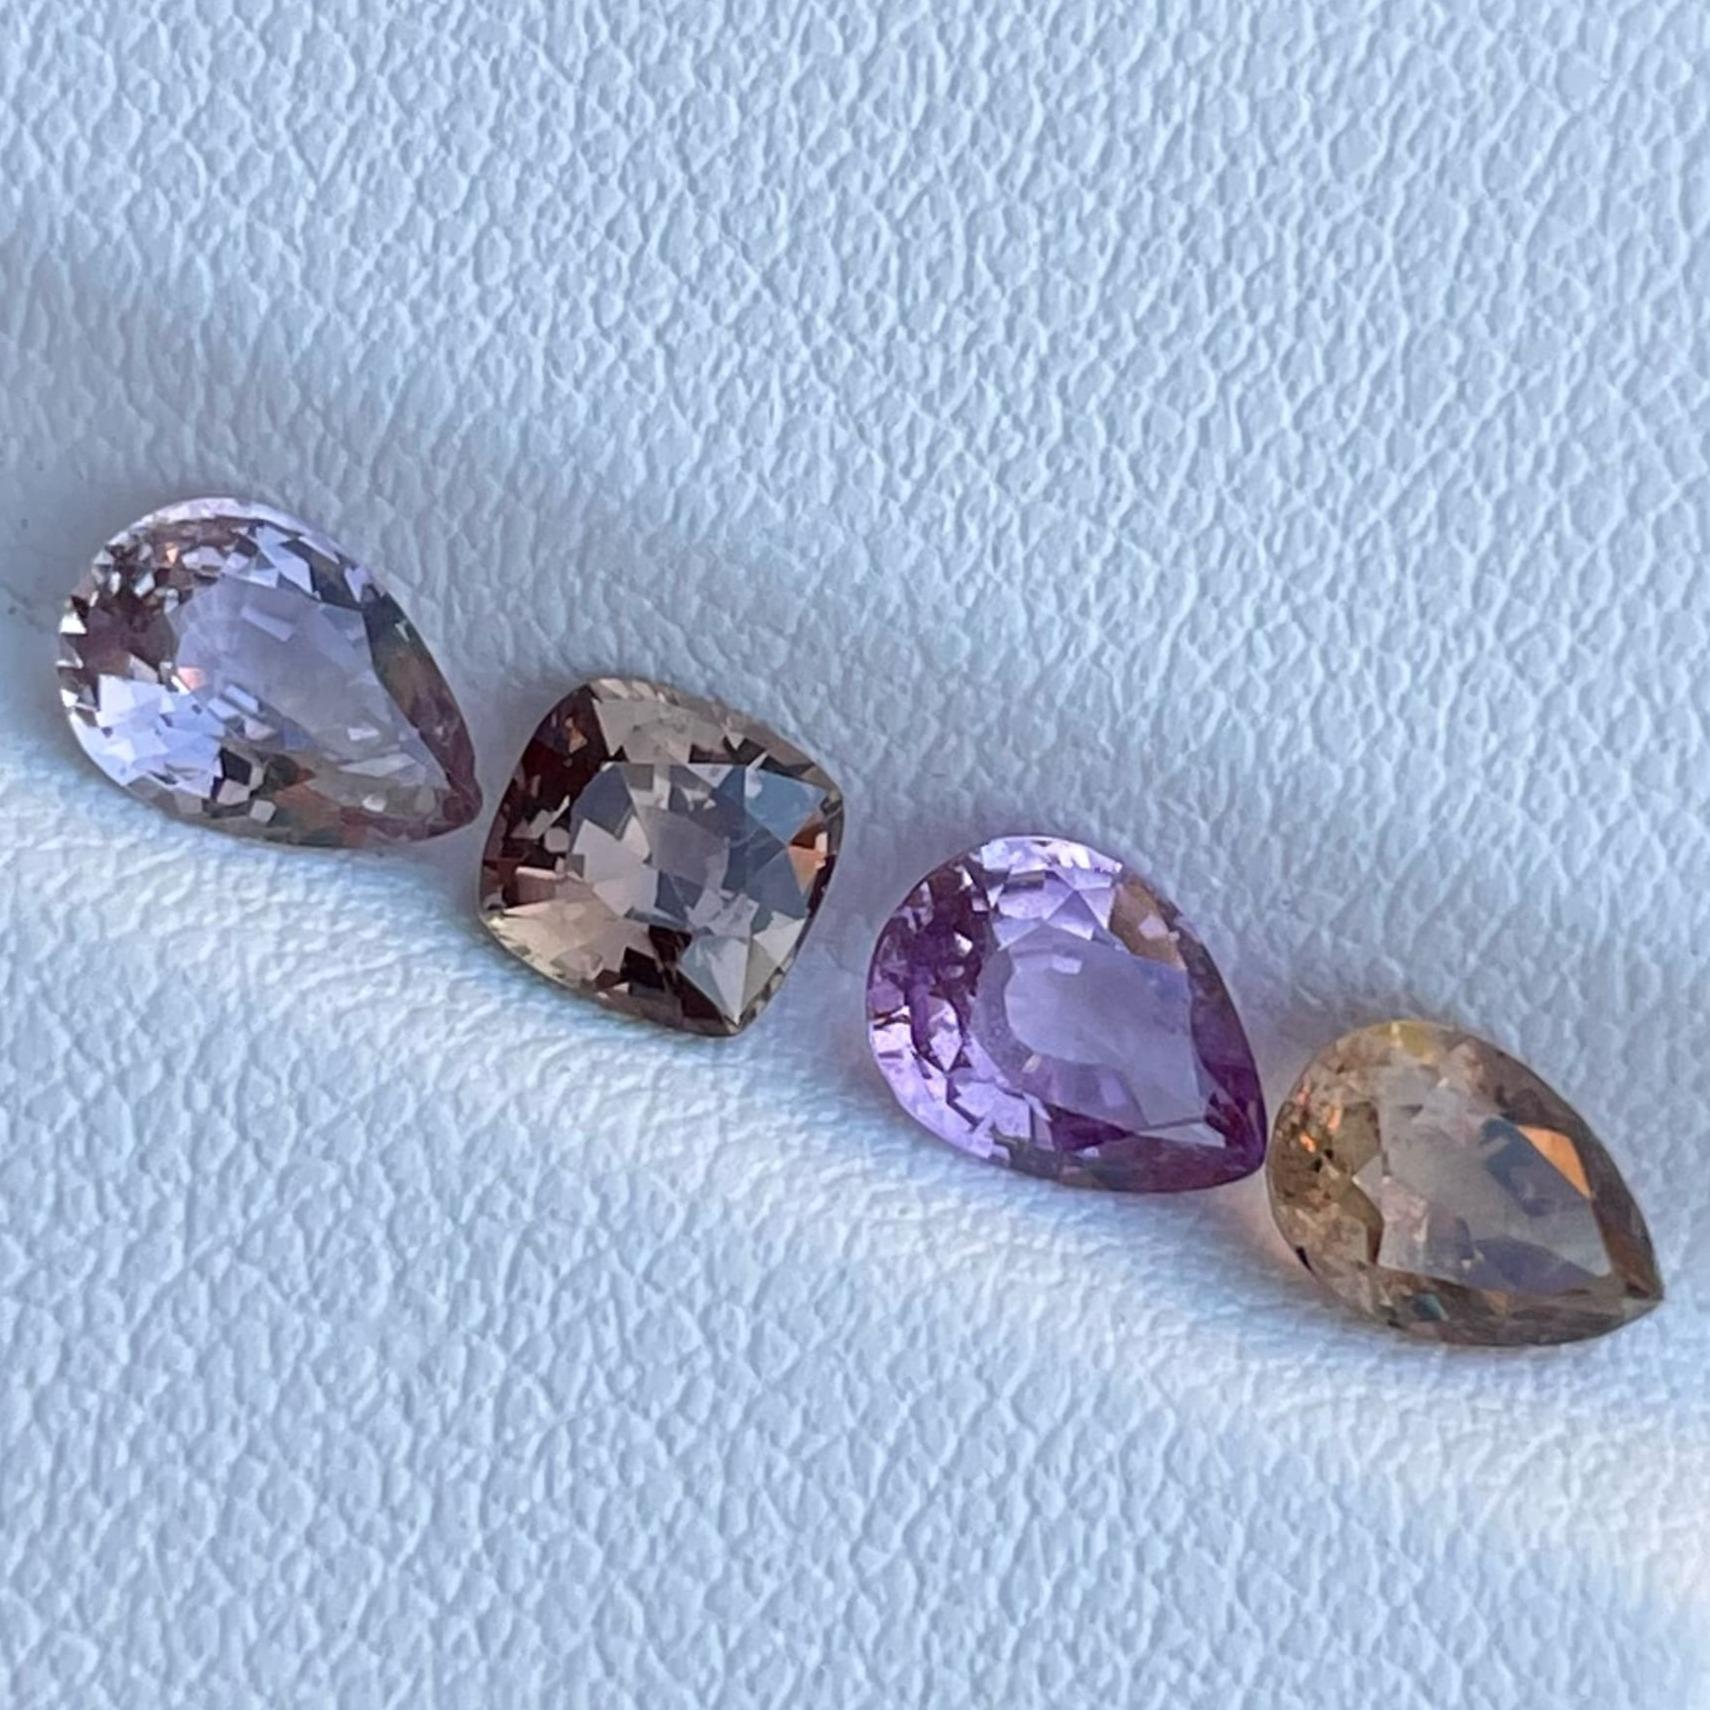 Gemstone Type Colorful Natural Sapphire From Africa
Weight 3.48 carats
Each weight 0.78, 0.99, 0.85 and 0.84 carats
Clarity VVS
Origin Madagascar
Treatment Heated





Sourced from the heart of Africa, these sapphires boast a vivid spectrum of